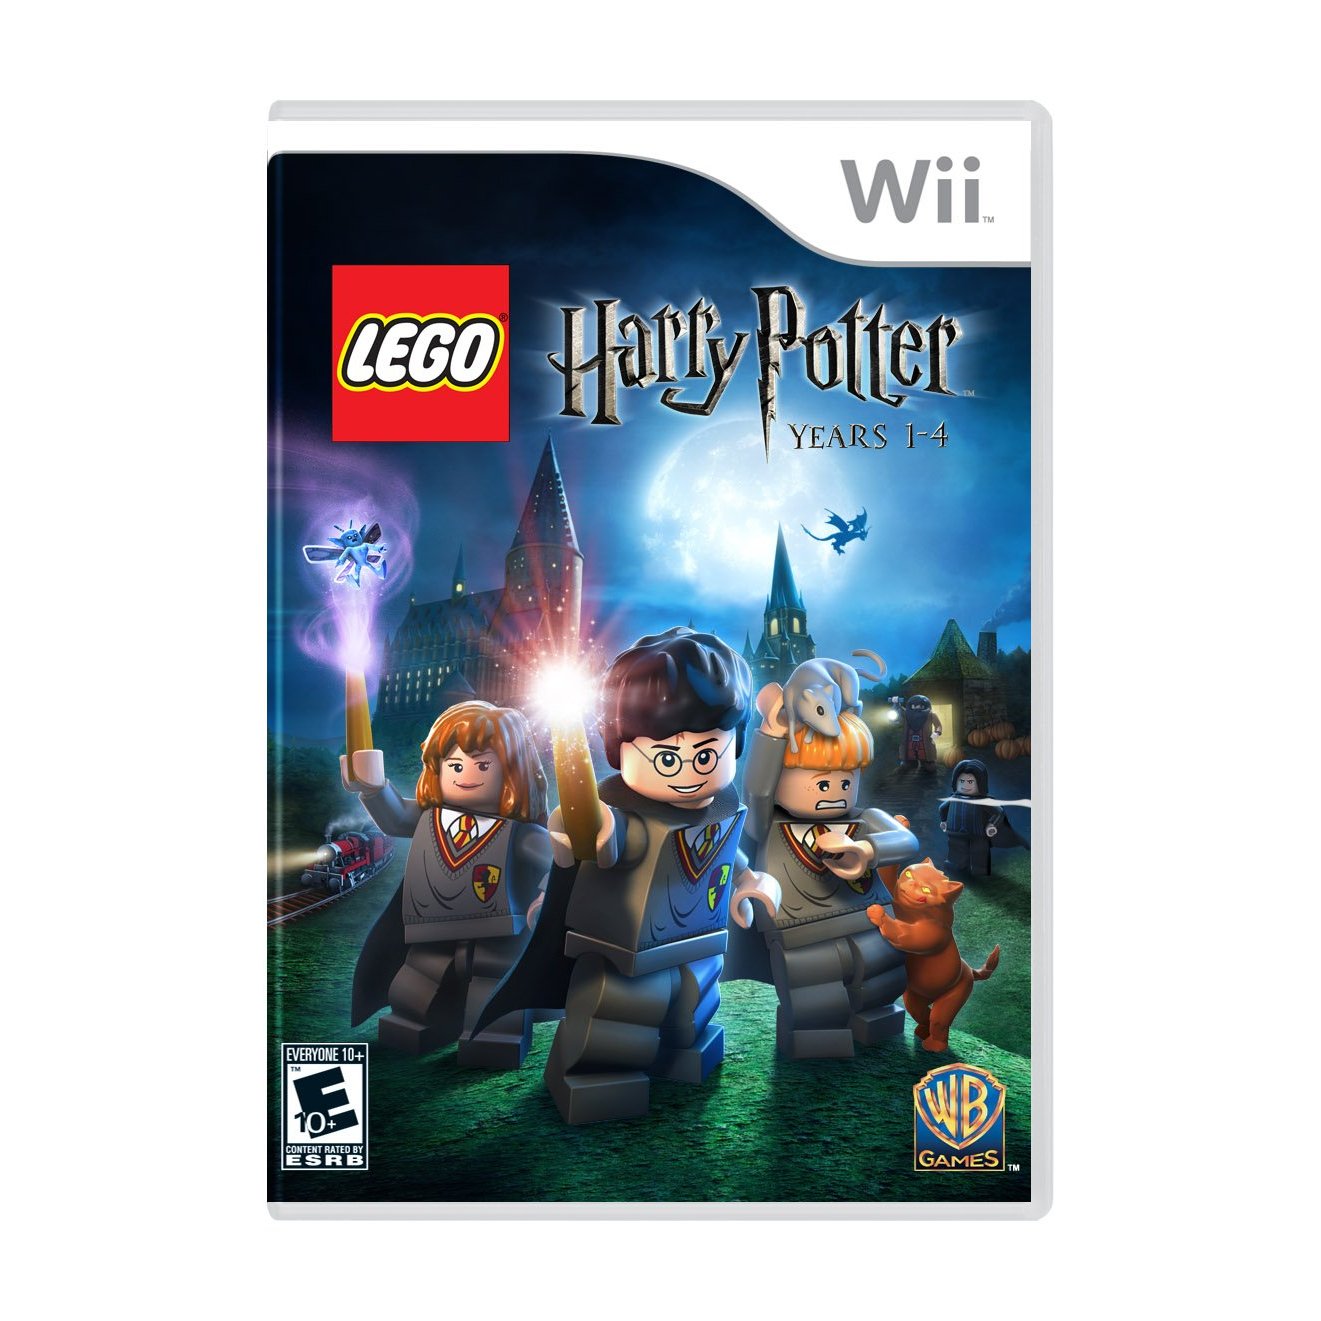 Wii Harry Potter Game Reviews